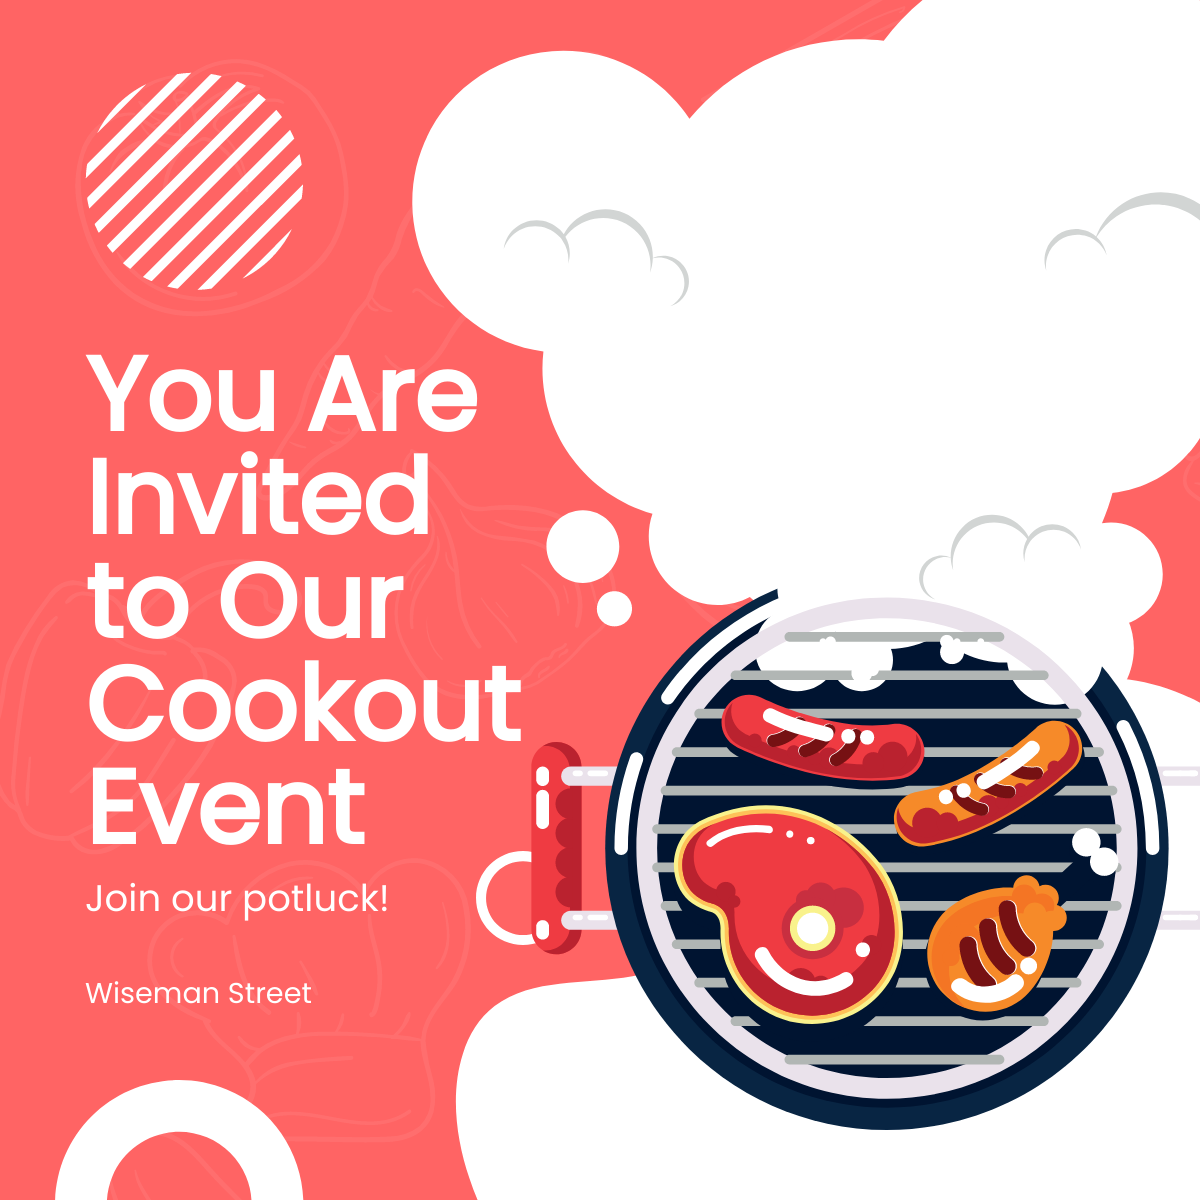 Cookout Event Linkedin Post